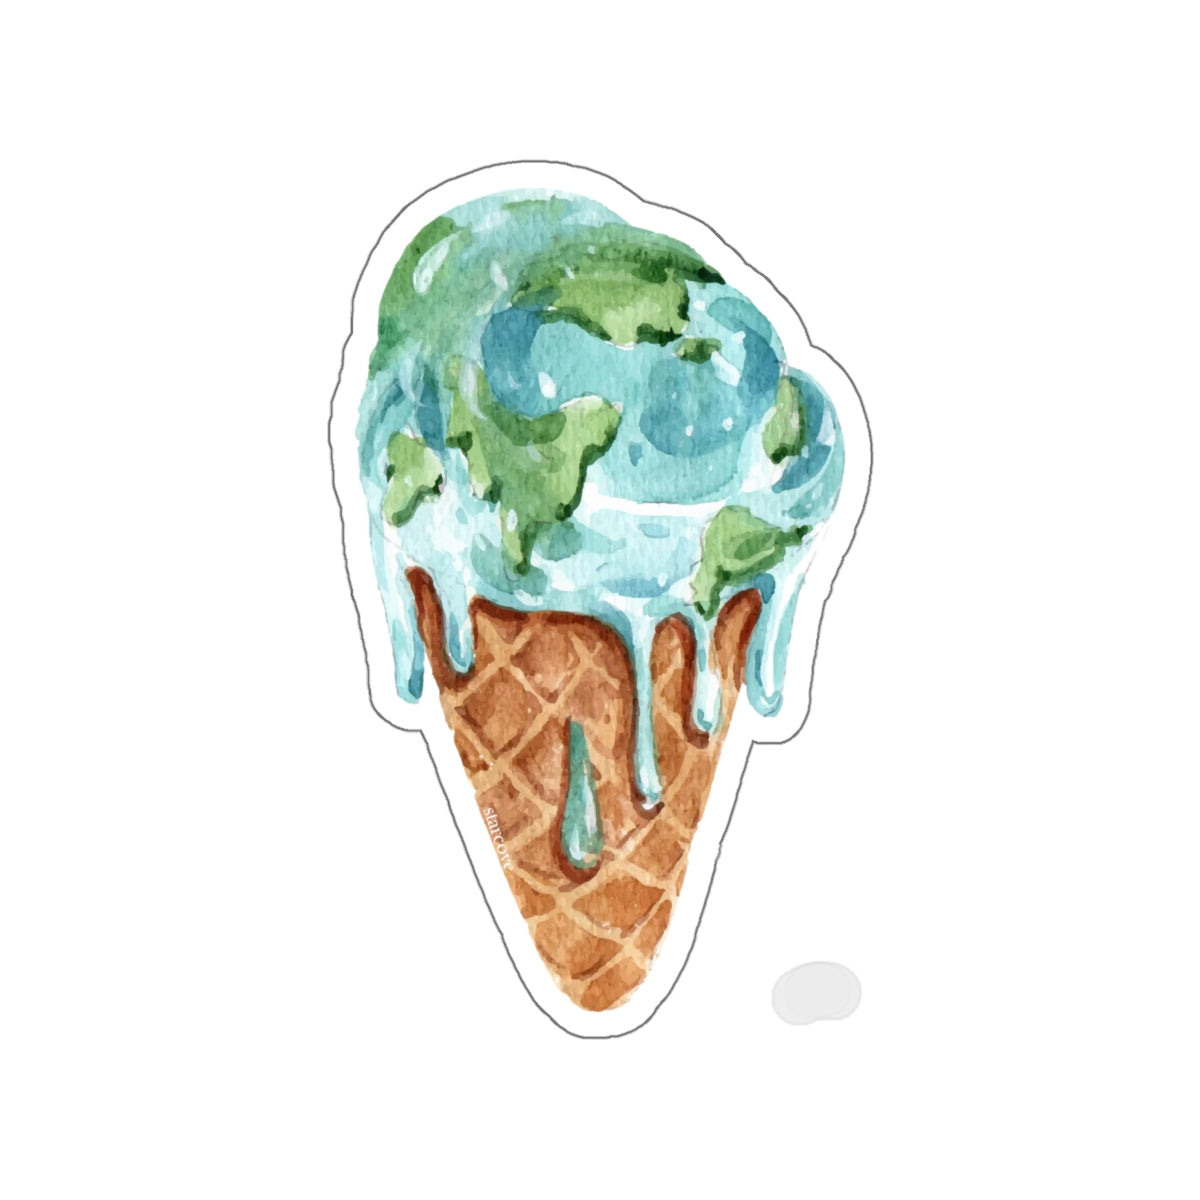 Melting Earth Ice Cream Cone Stickers, Climate Change Planet Global Warming Laptop Vinyl Cute Waterbottle Tumbler Car Bumper Aesthetic Decal Starcove Fashion